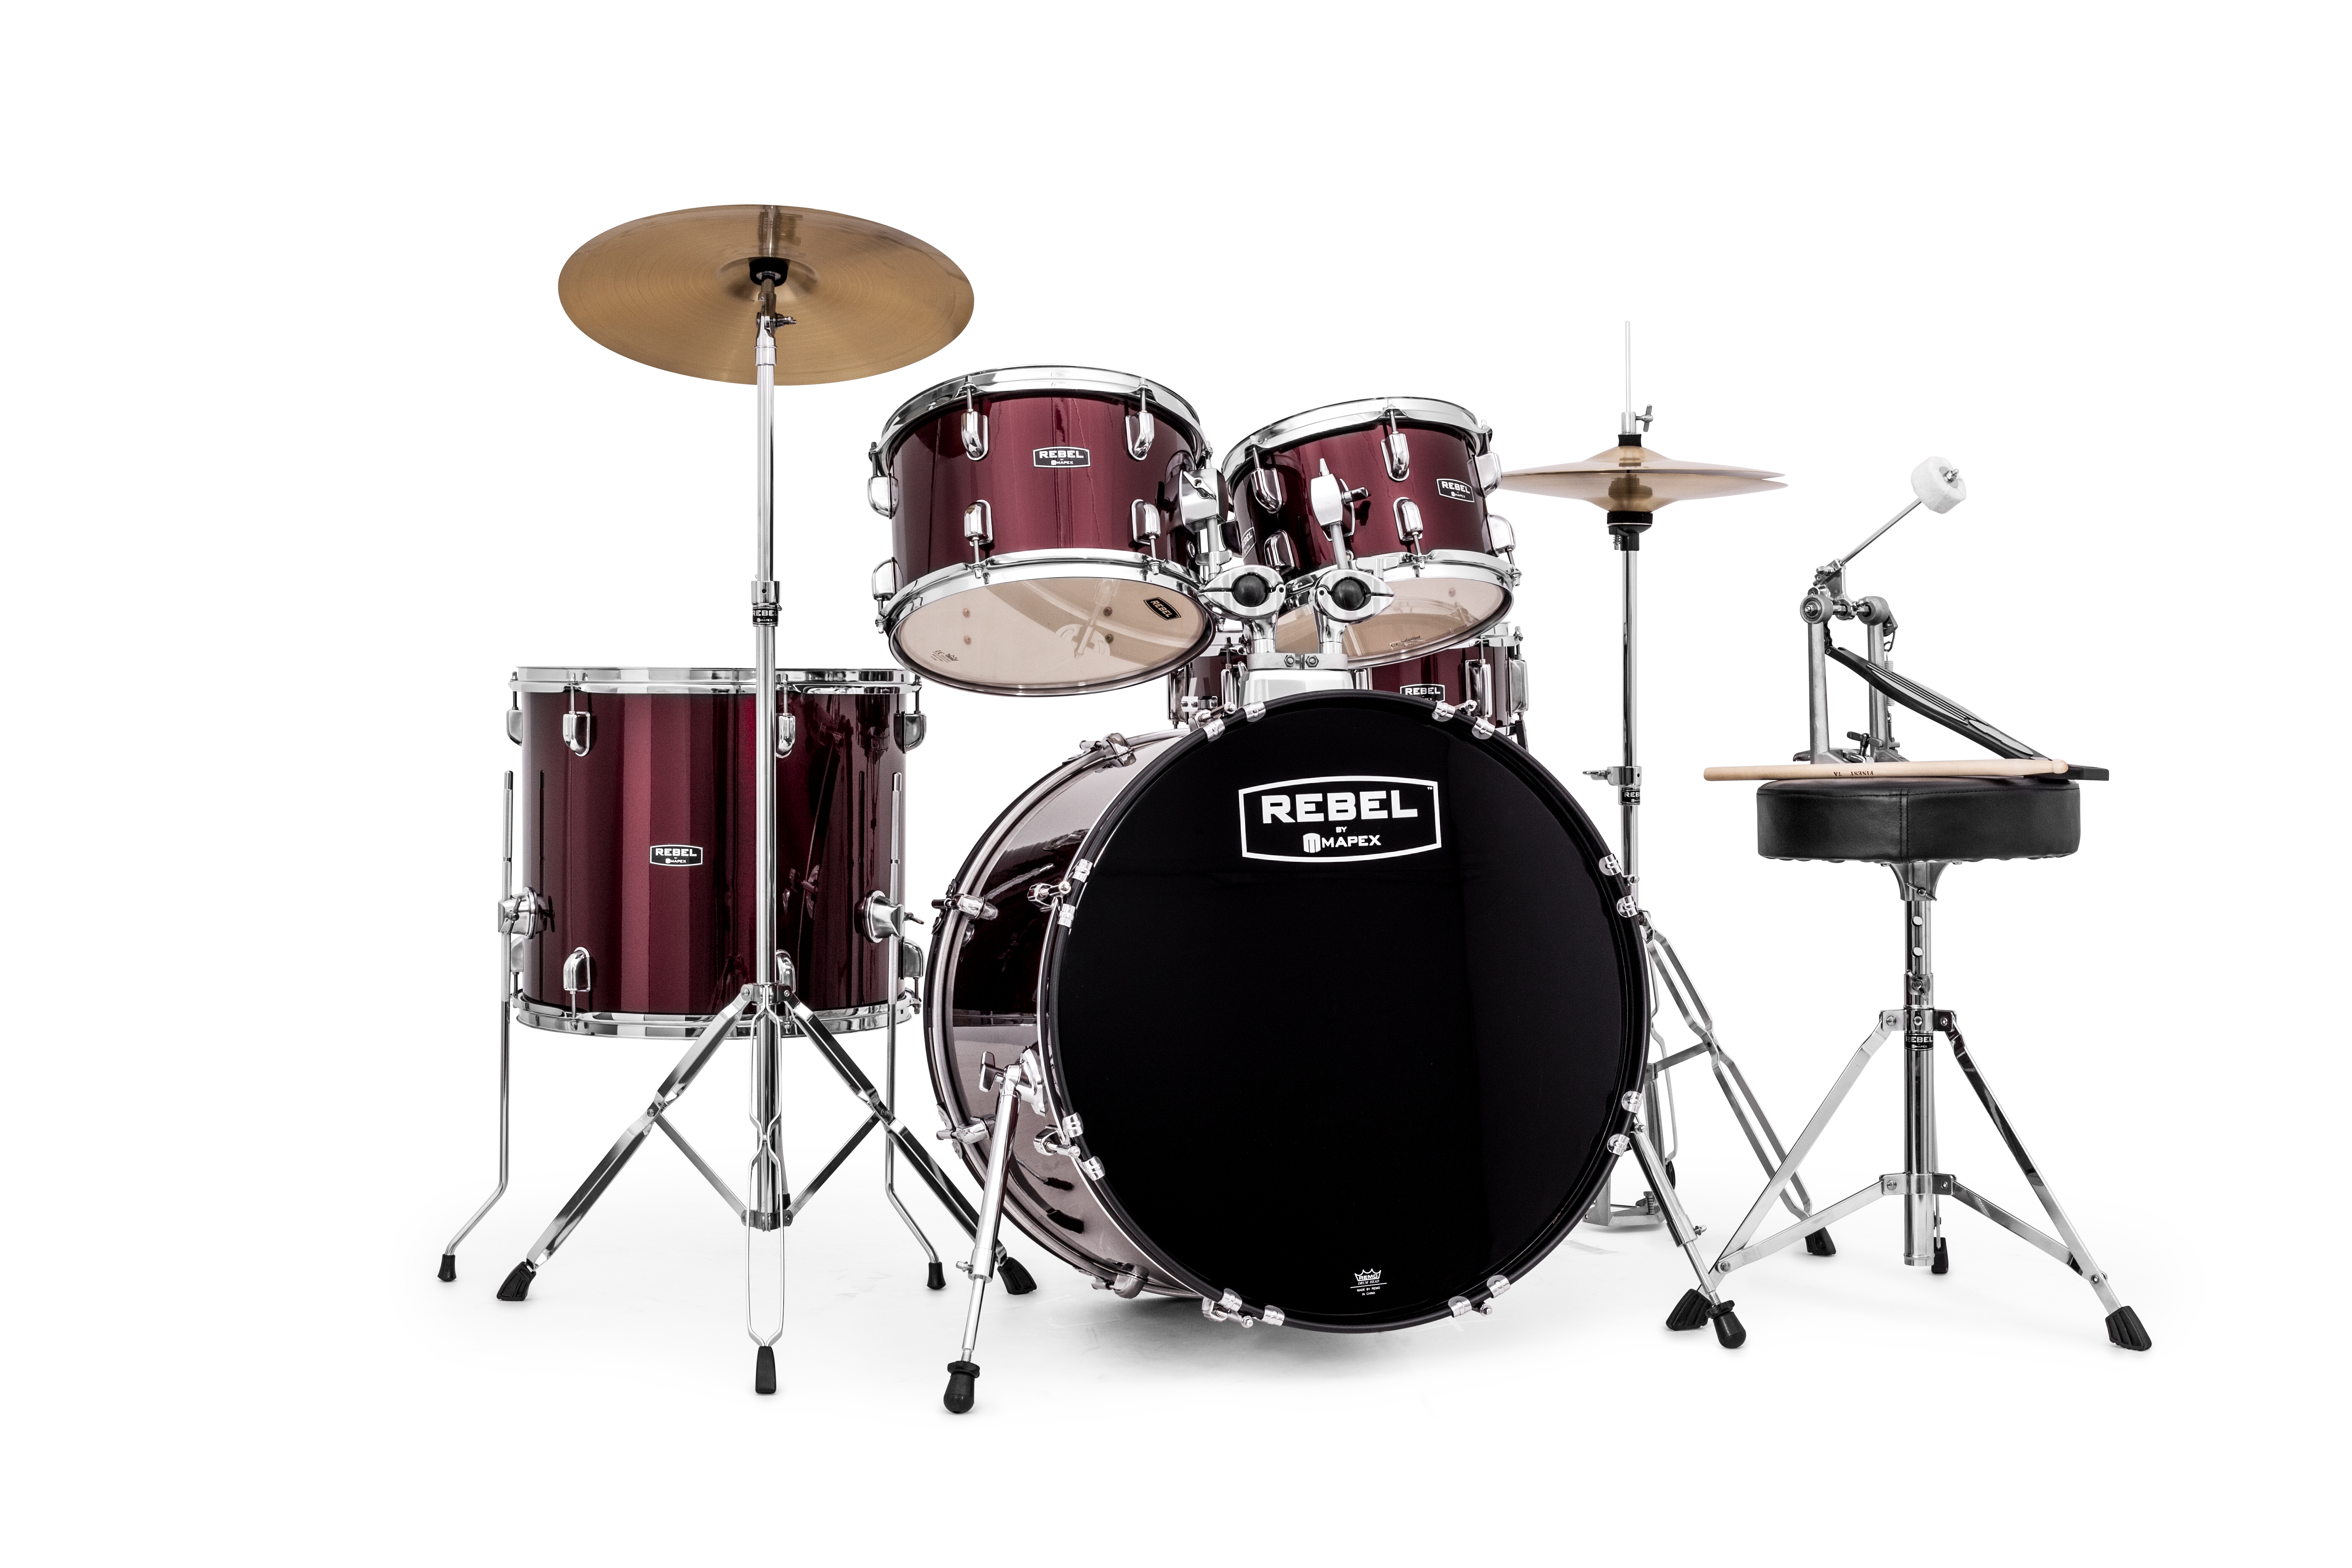 Mapex Rebel 5-piece SRO Complete Set Up with Fast Size Toms - RB5294FTCDR - Dark Red